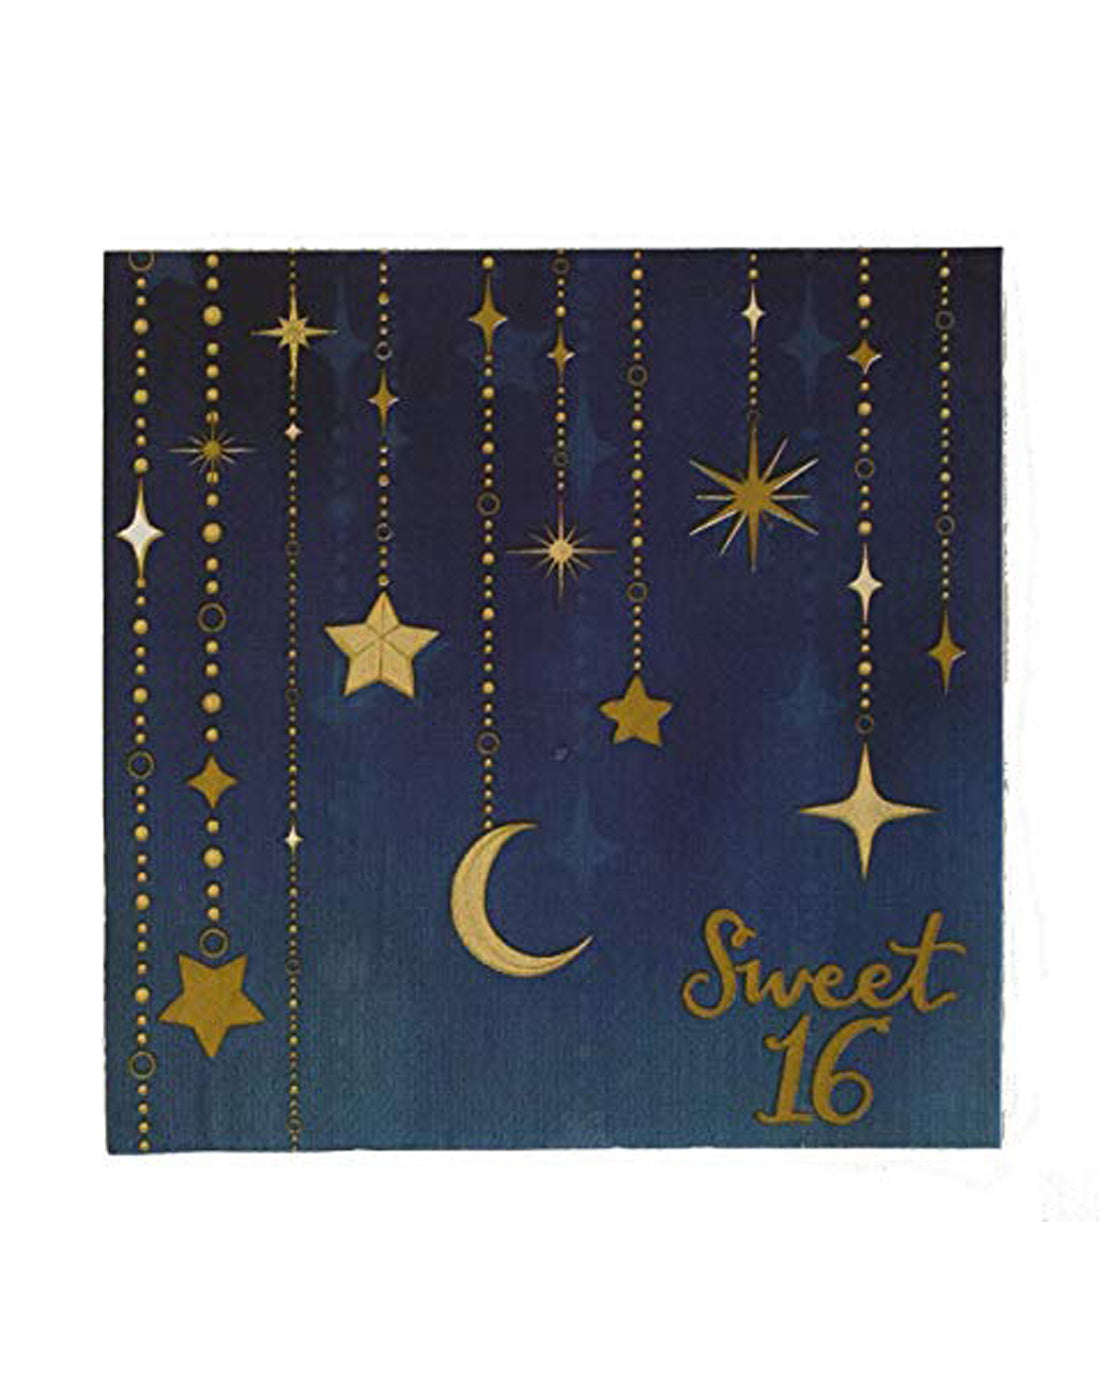 Lunch Napkins - Sweet 16 16ct